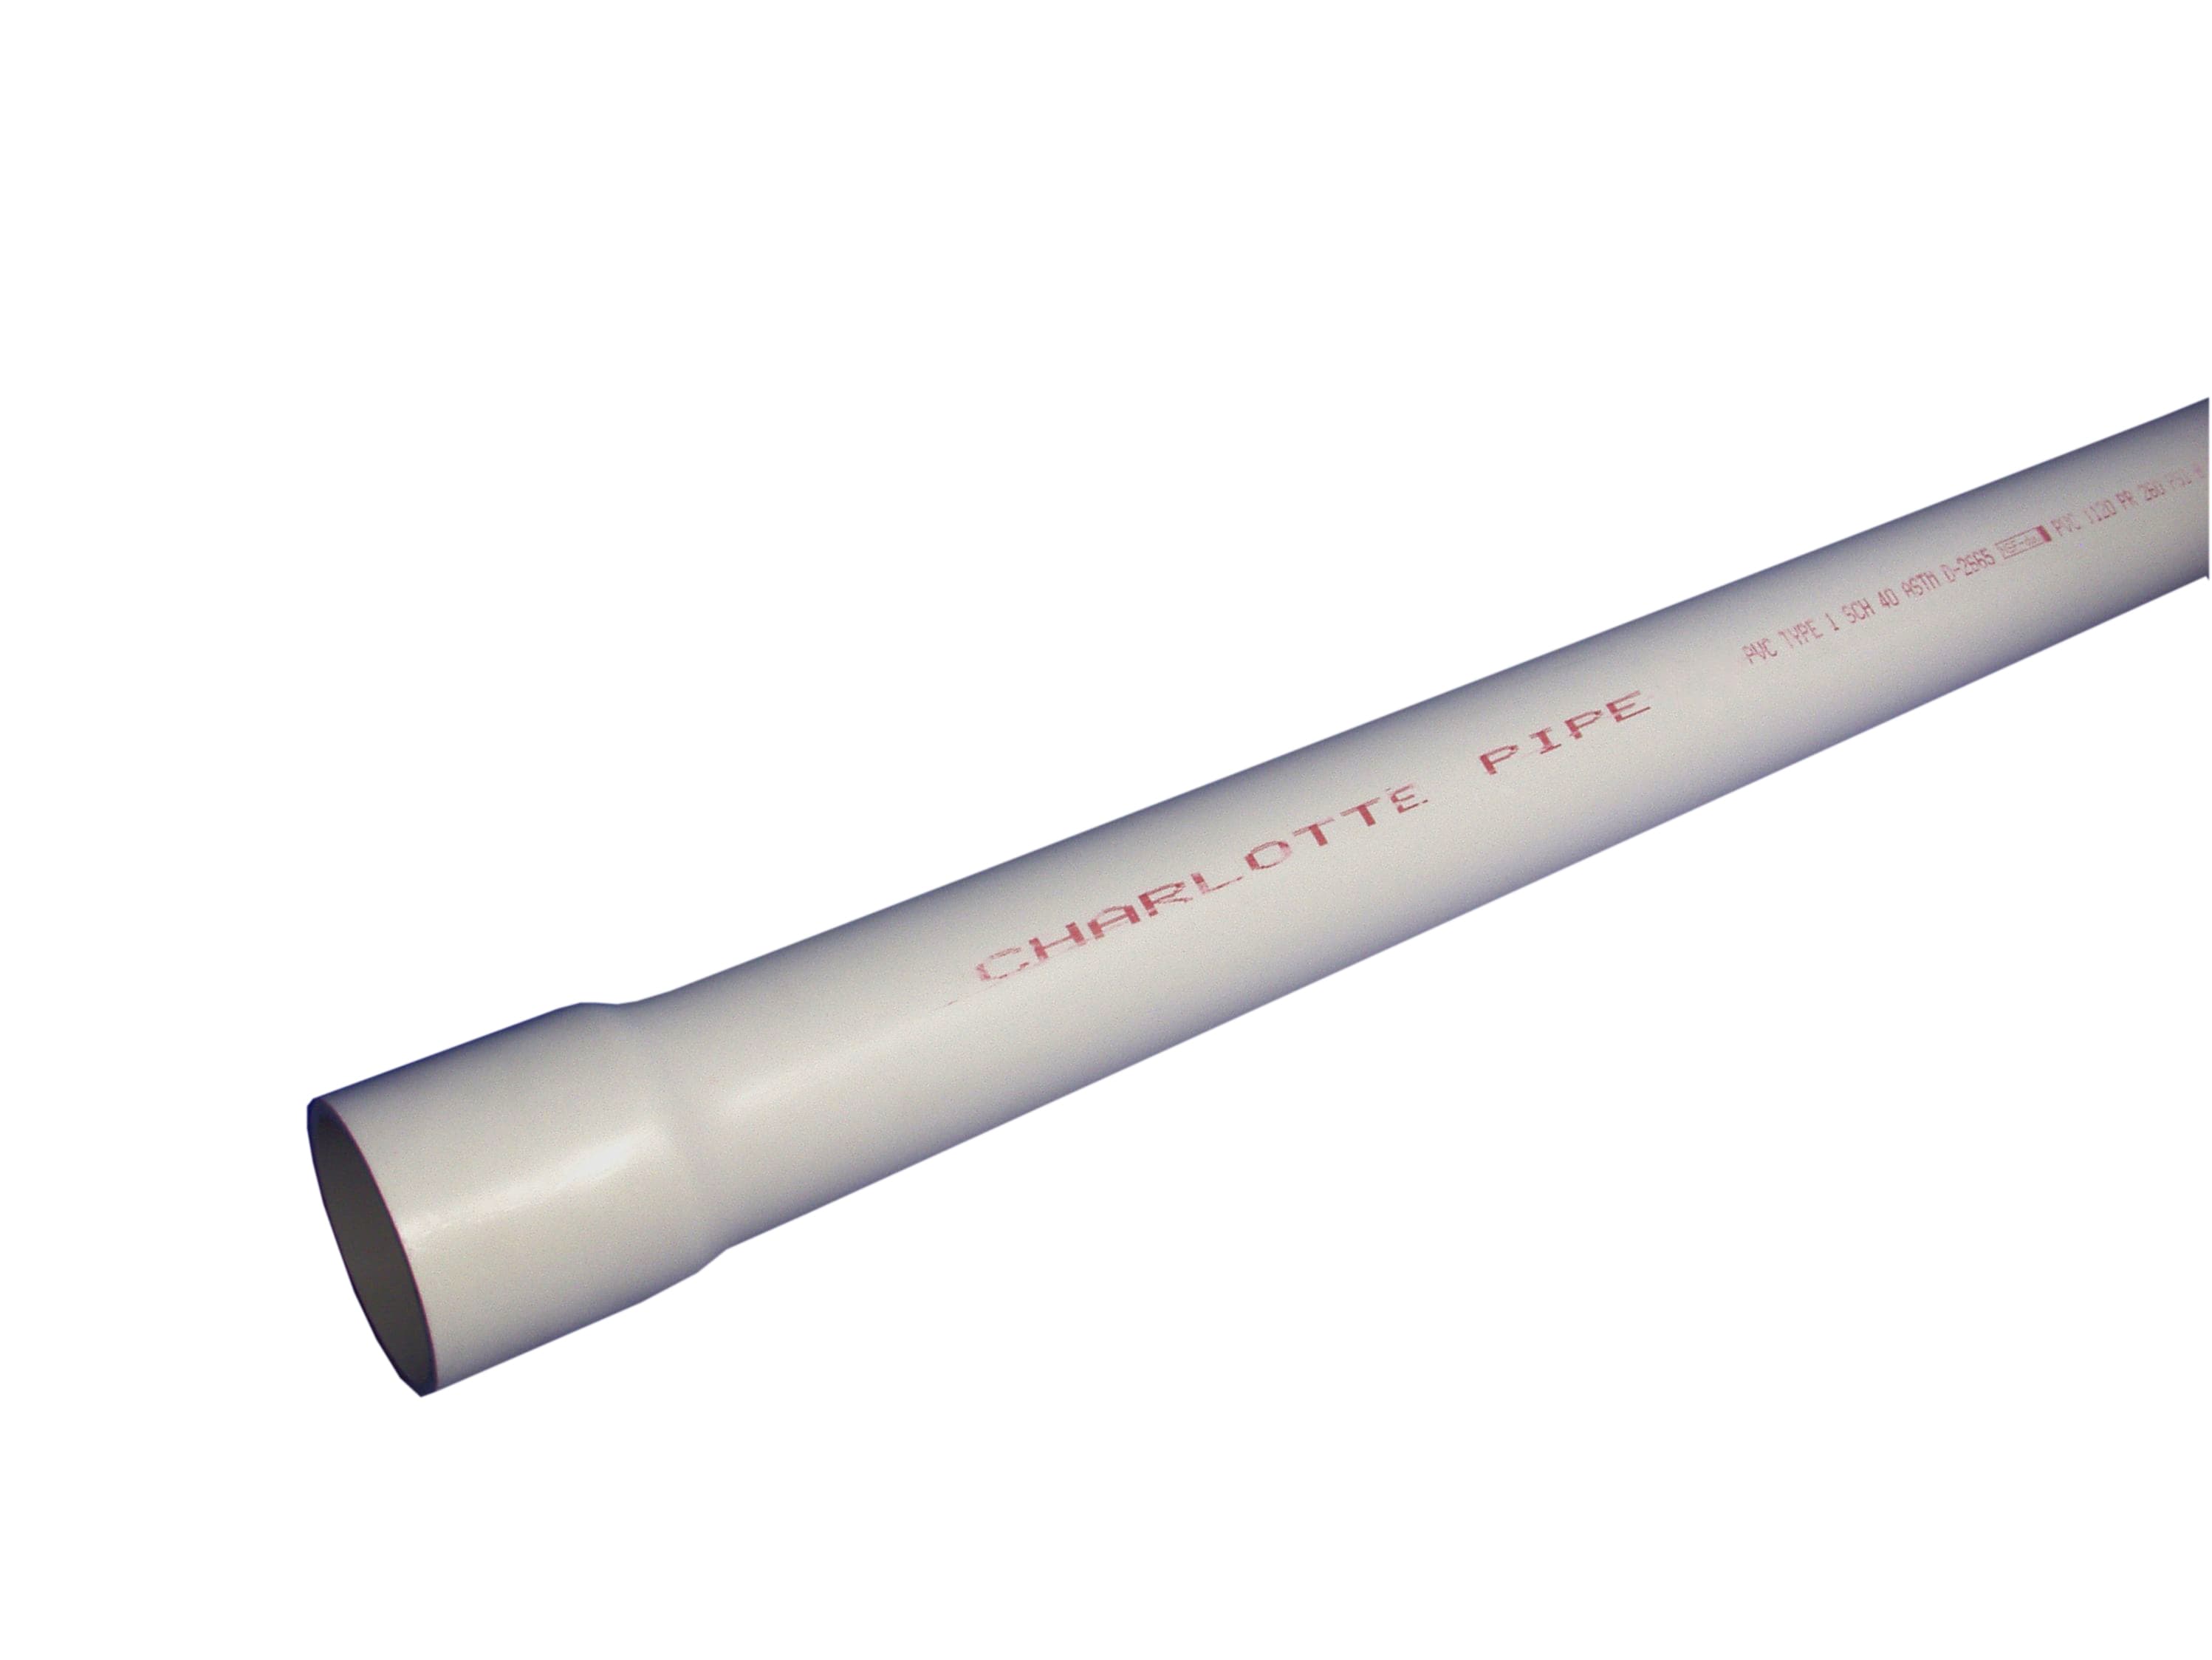 NEW PVC Pipe (Sch 40) Diameters (1 - 4) & Lengths (1ft - 5ft) FREE  SHIPPING 🔥